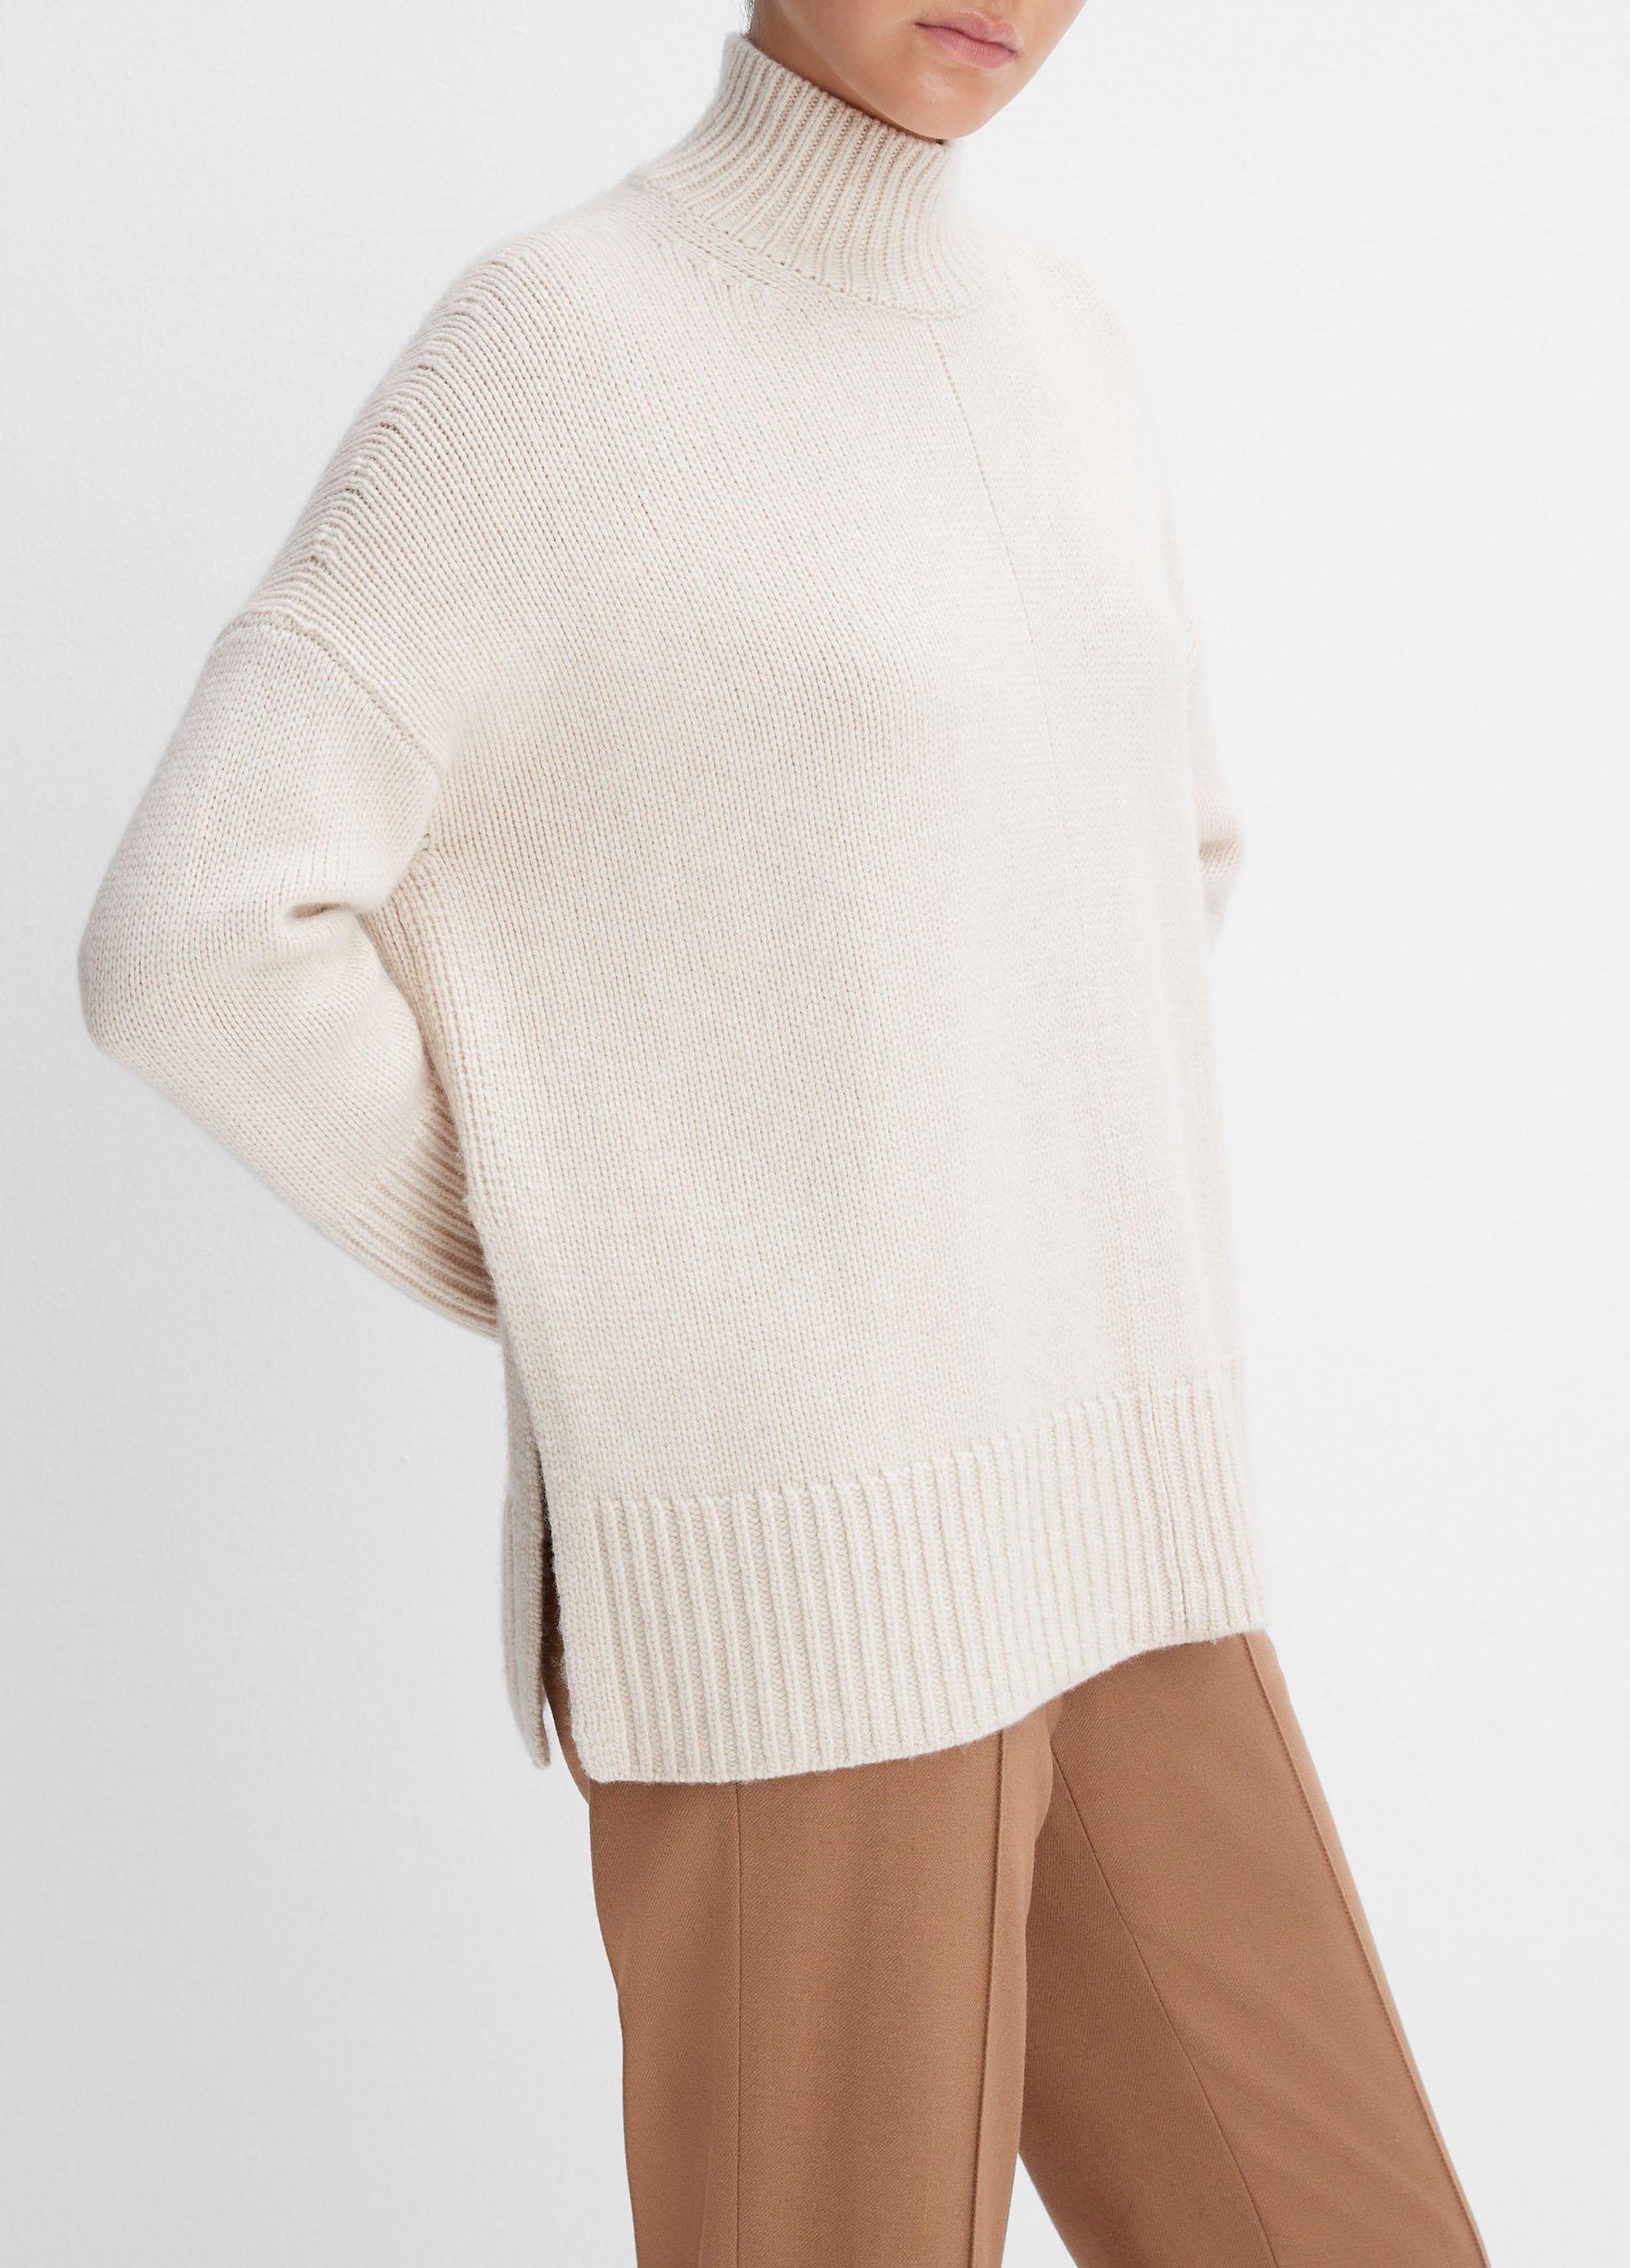 Wool and Cashmere Trapeze Turtleneck Sweater in Sweaters | Vince